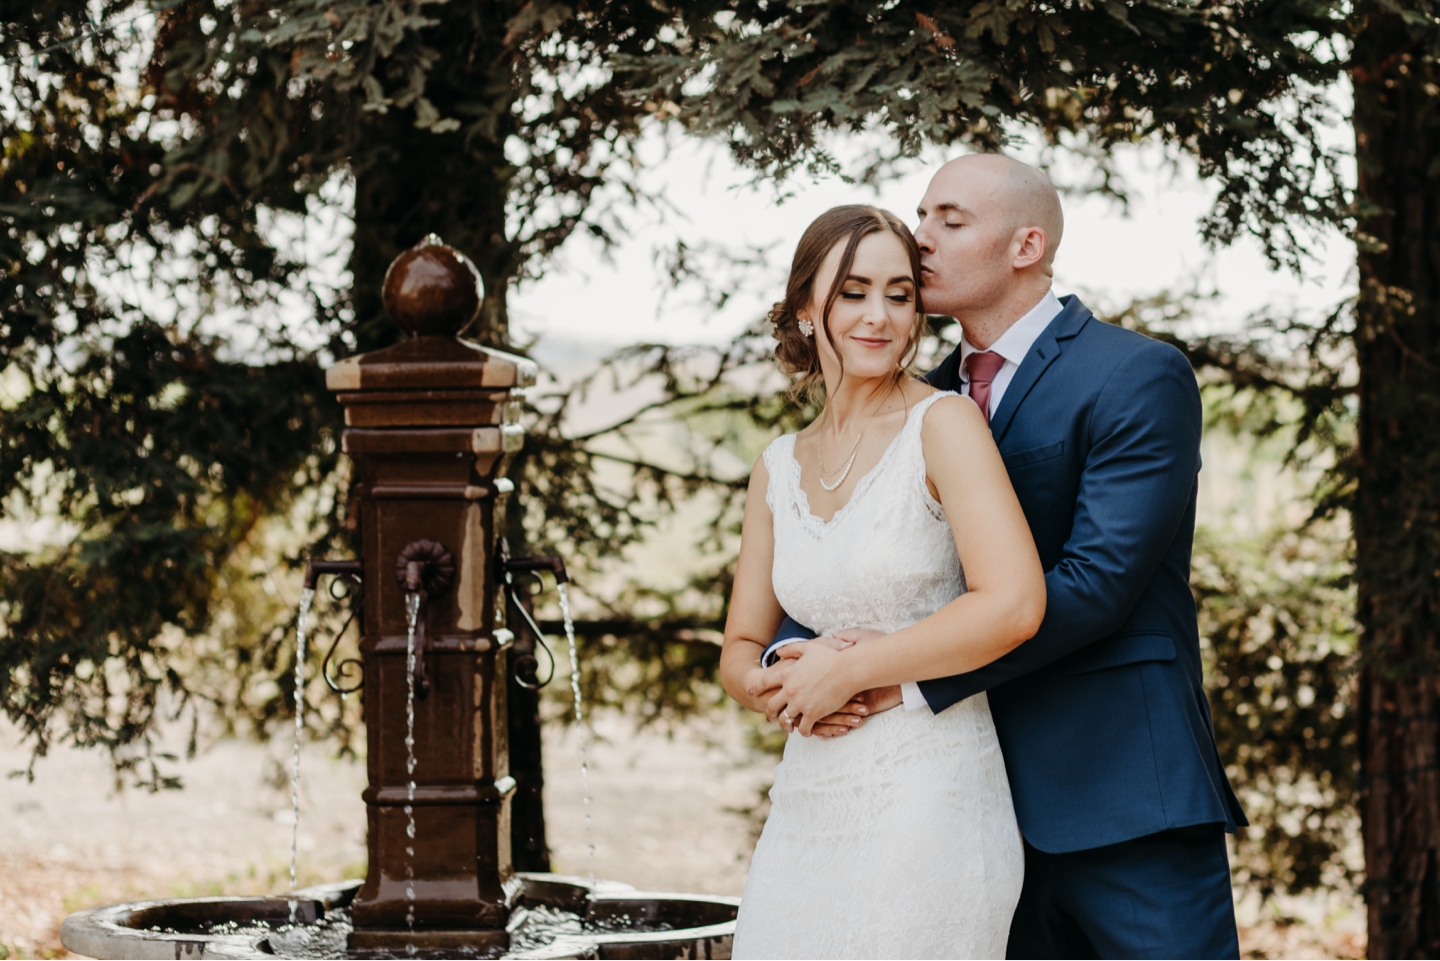 Groom hugs bride from behind and kisses her forehead as she leans into him and smiles. Wedding photography in Sacramento by Liz Koston.